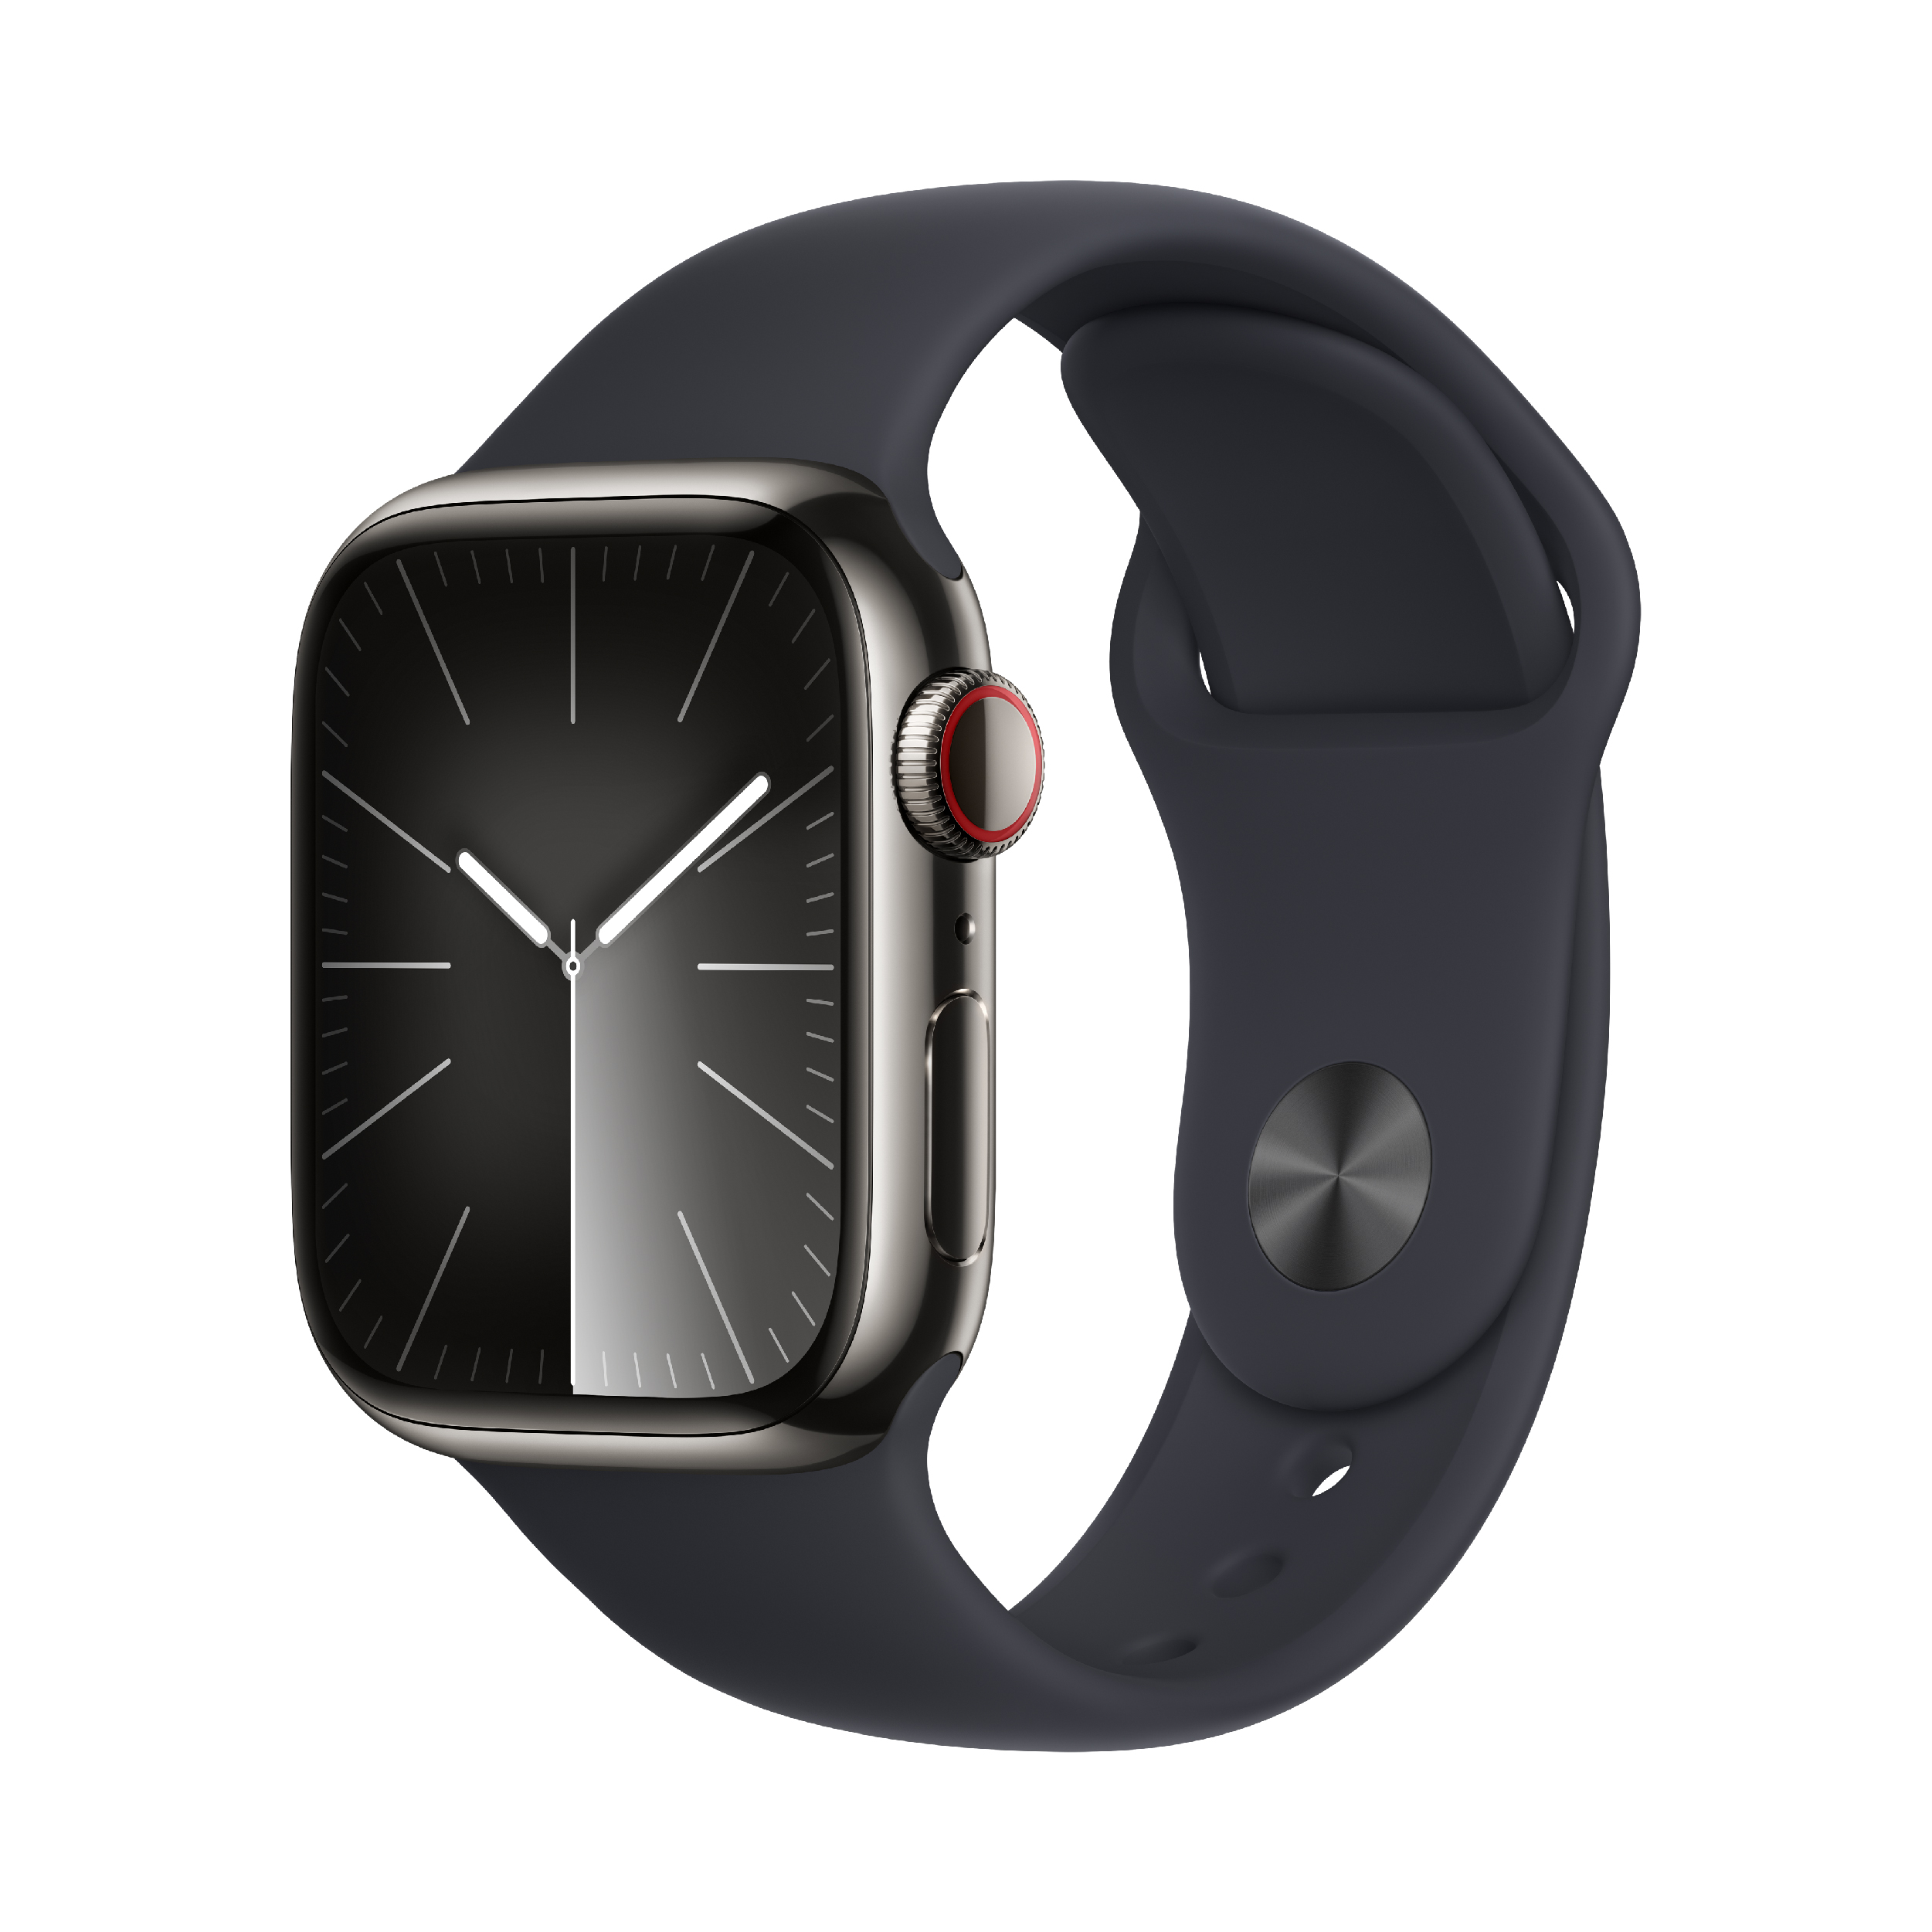 APPLE Smartwatch Series 9 GPS + Cellular 41mm, Graphite Stainless Steel with Graphite Milanese Loop Strap | Apple| Image 2